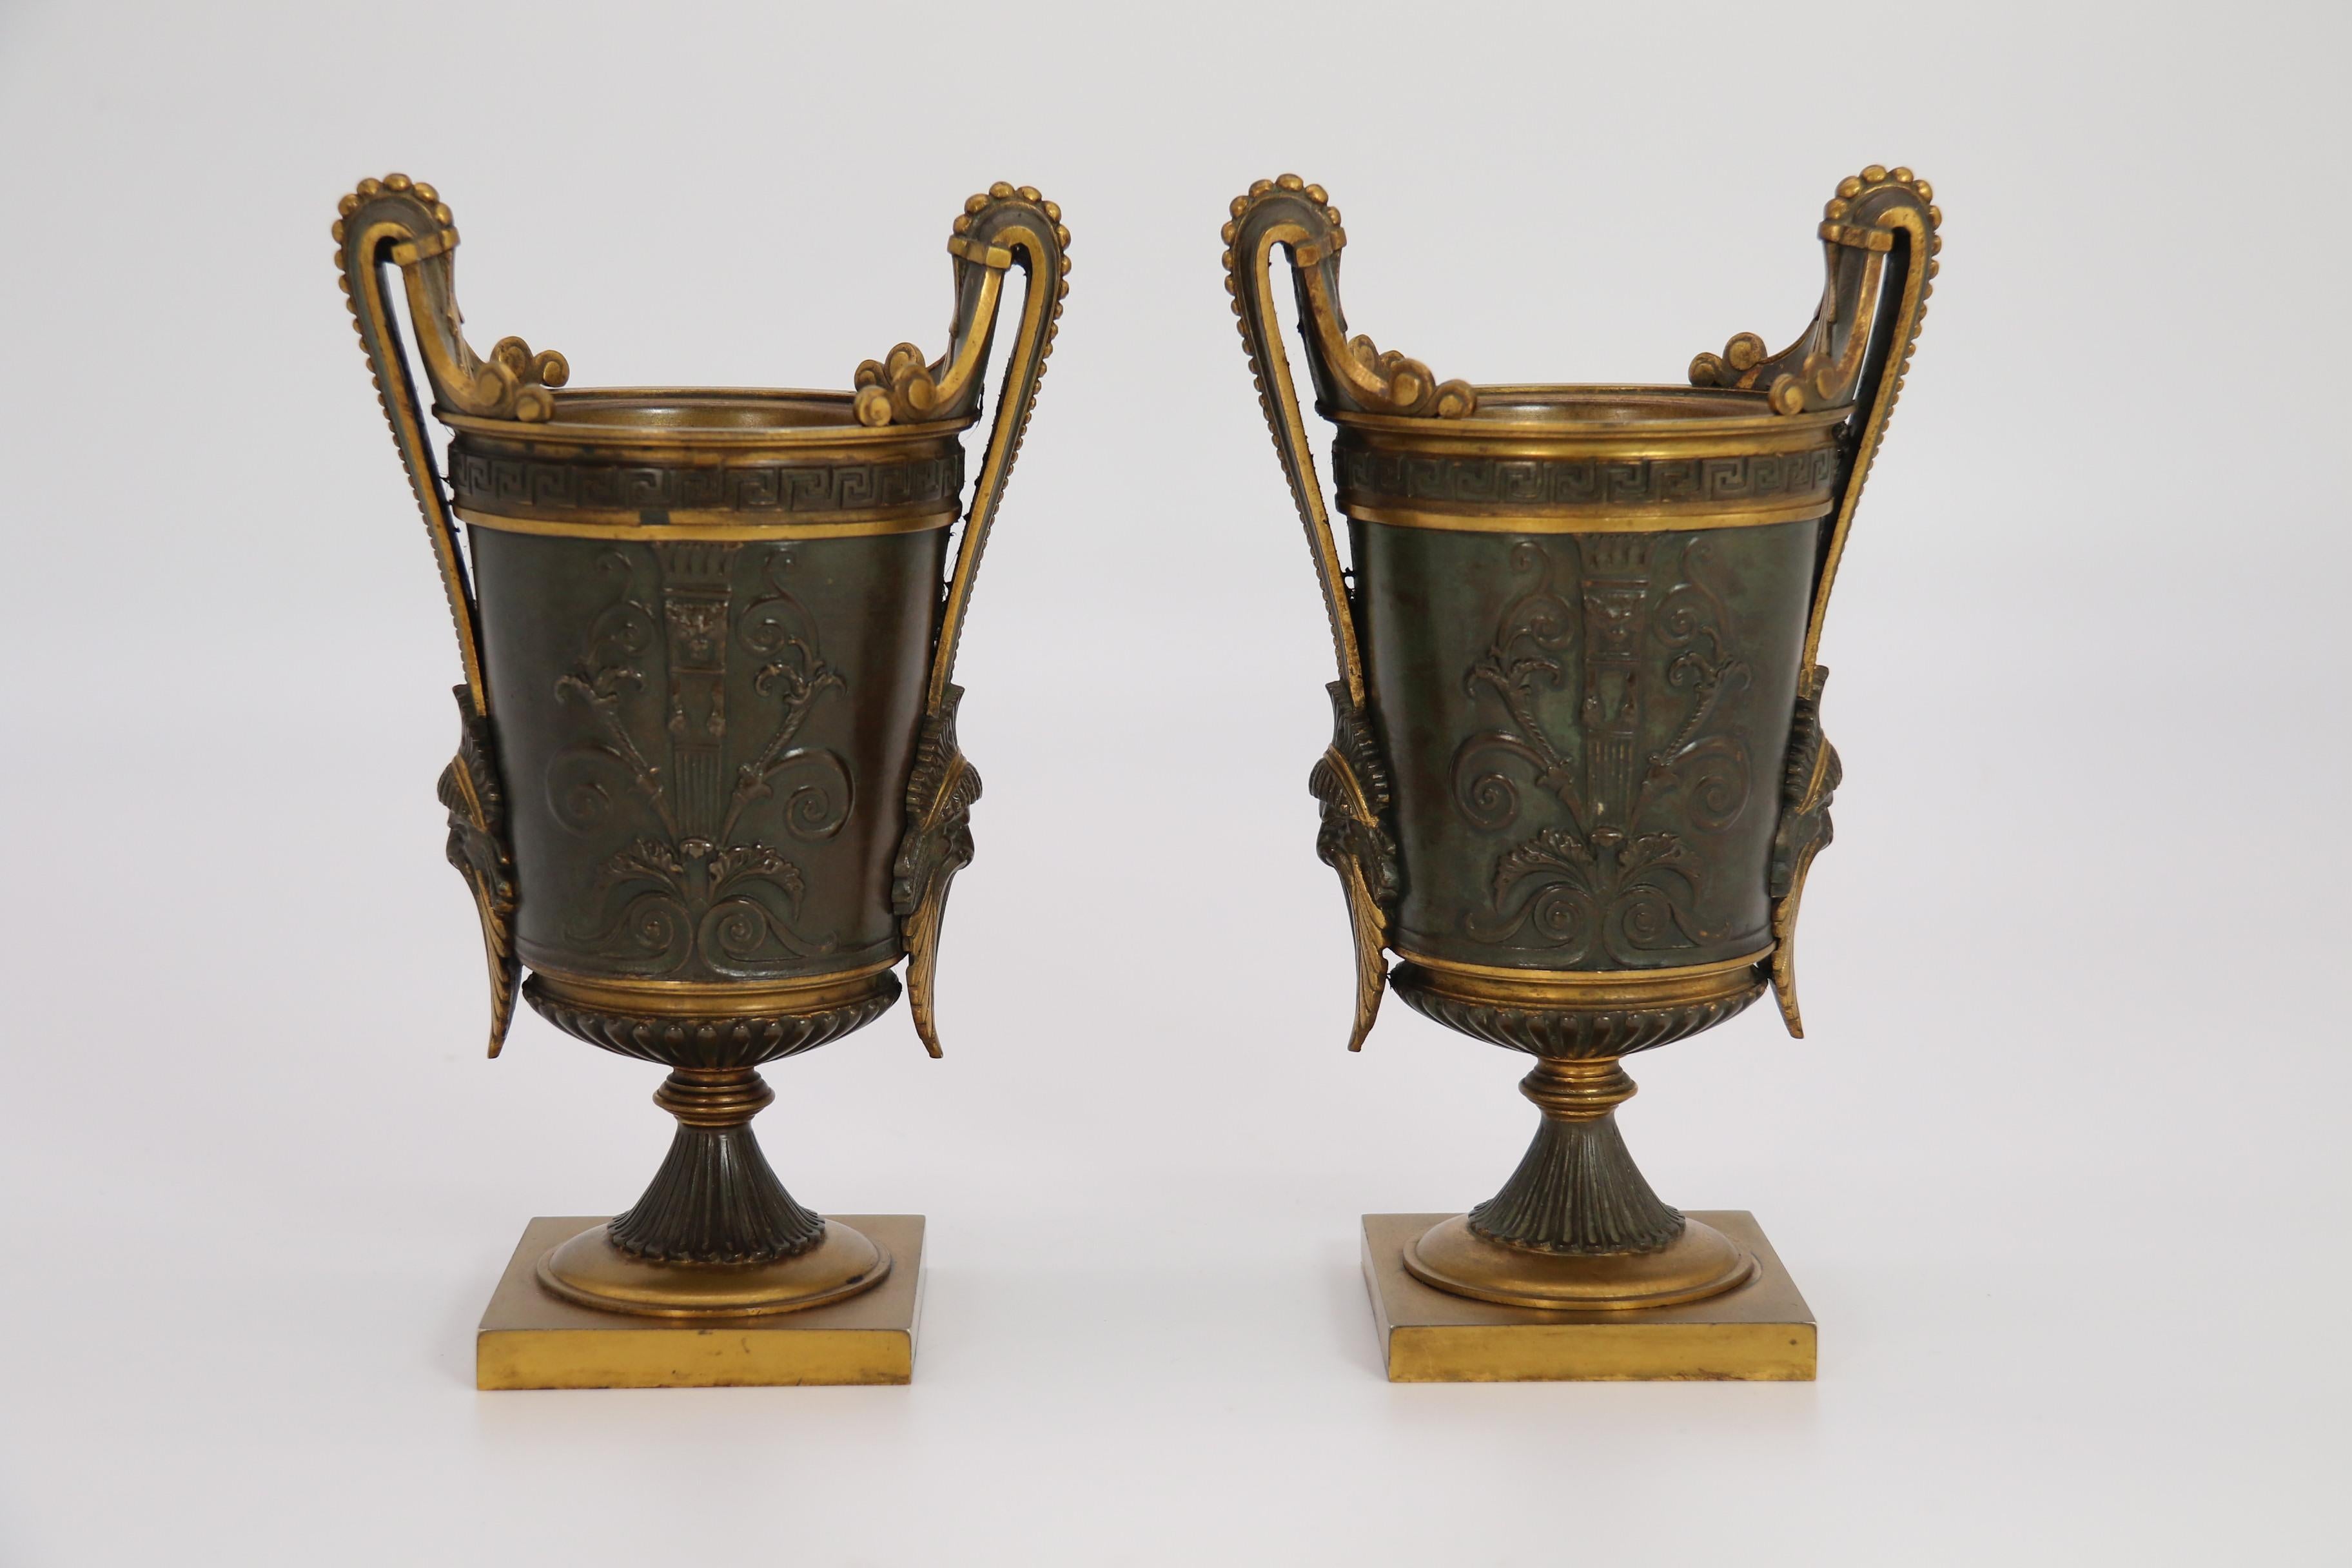 This superb quality pair of French Empire classical twin handled urns is very stylish and cast in very heavy solid bronze with alternate sections highlighted with original ormolu which is in excellent condition.

The urns stand on square plain bases